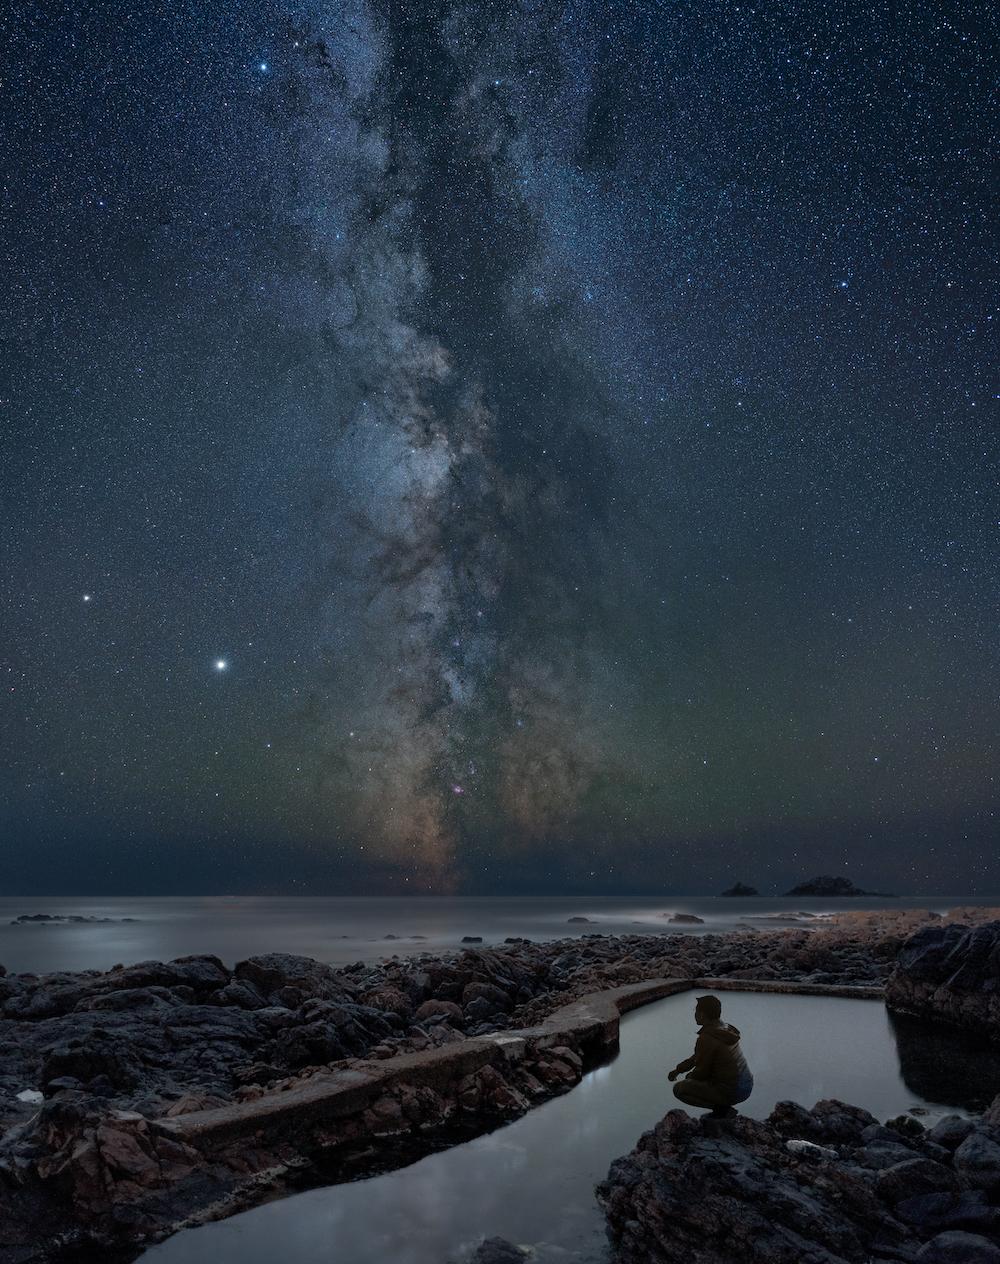 A person stares into a rockpool at night, with constellations soaring above